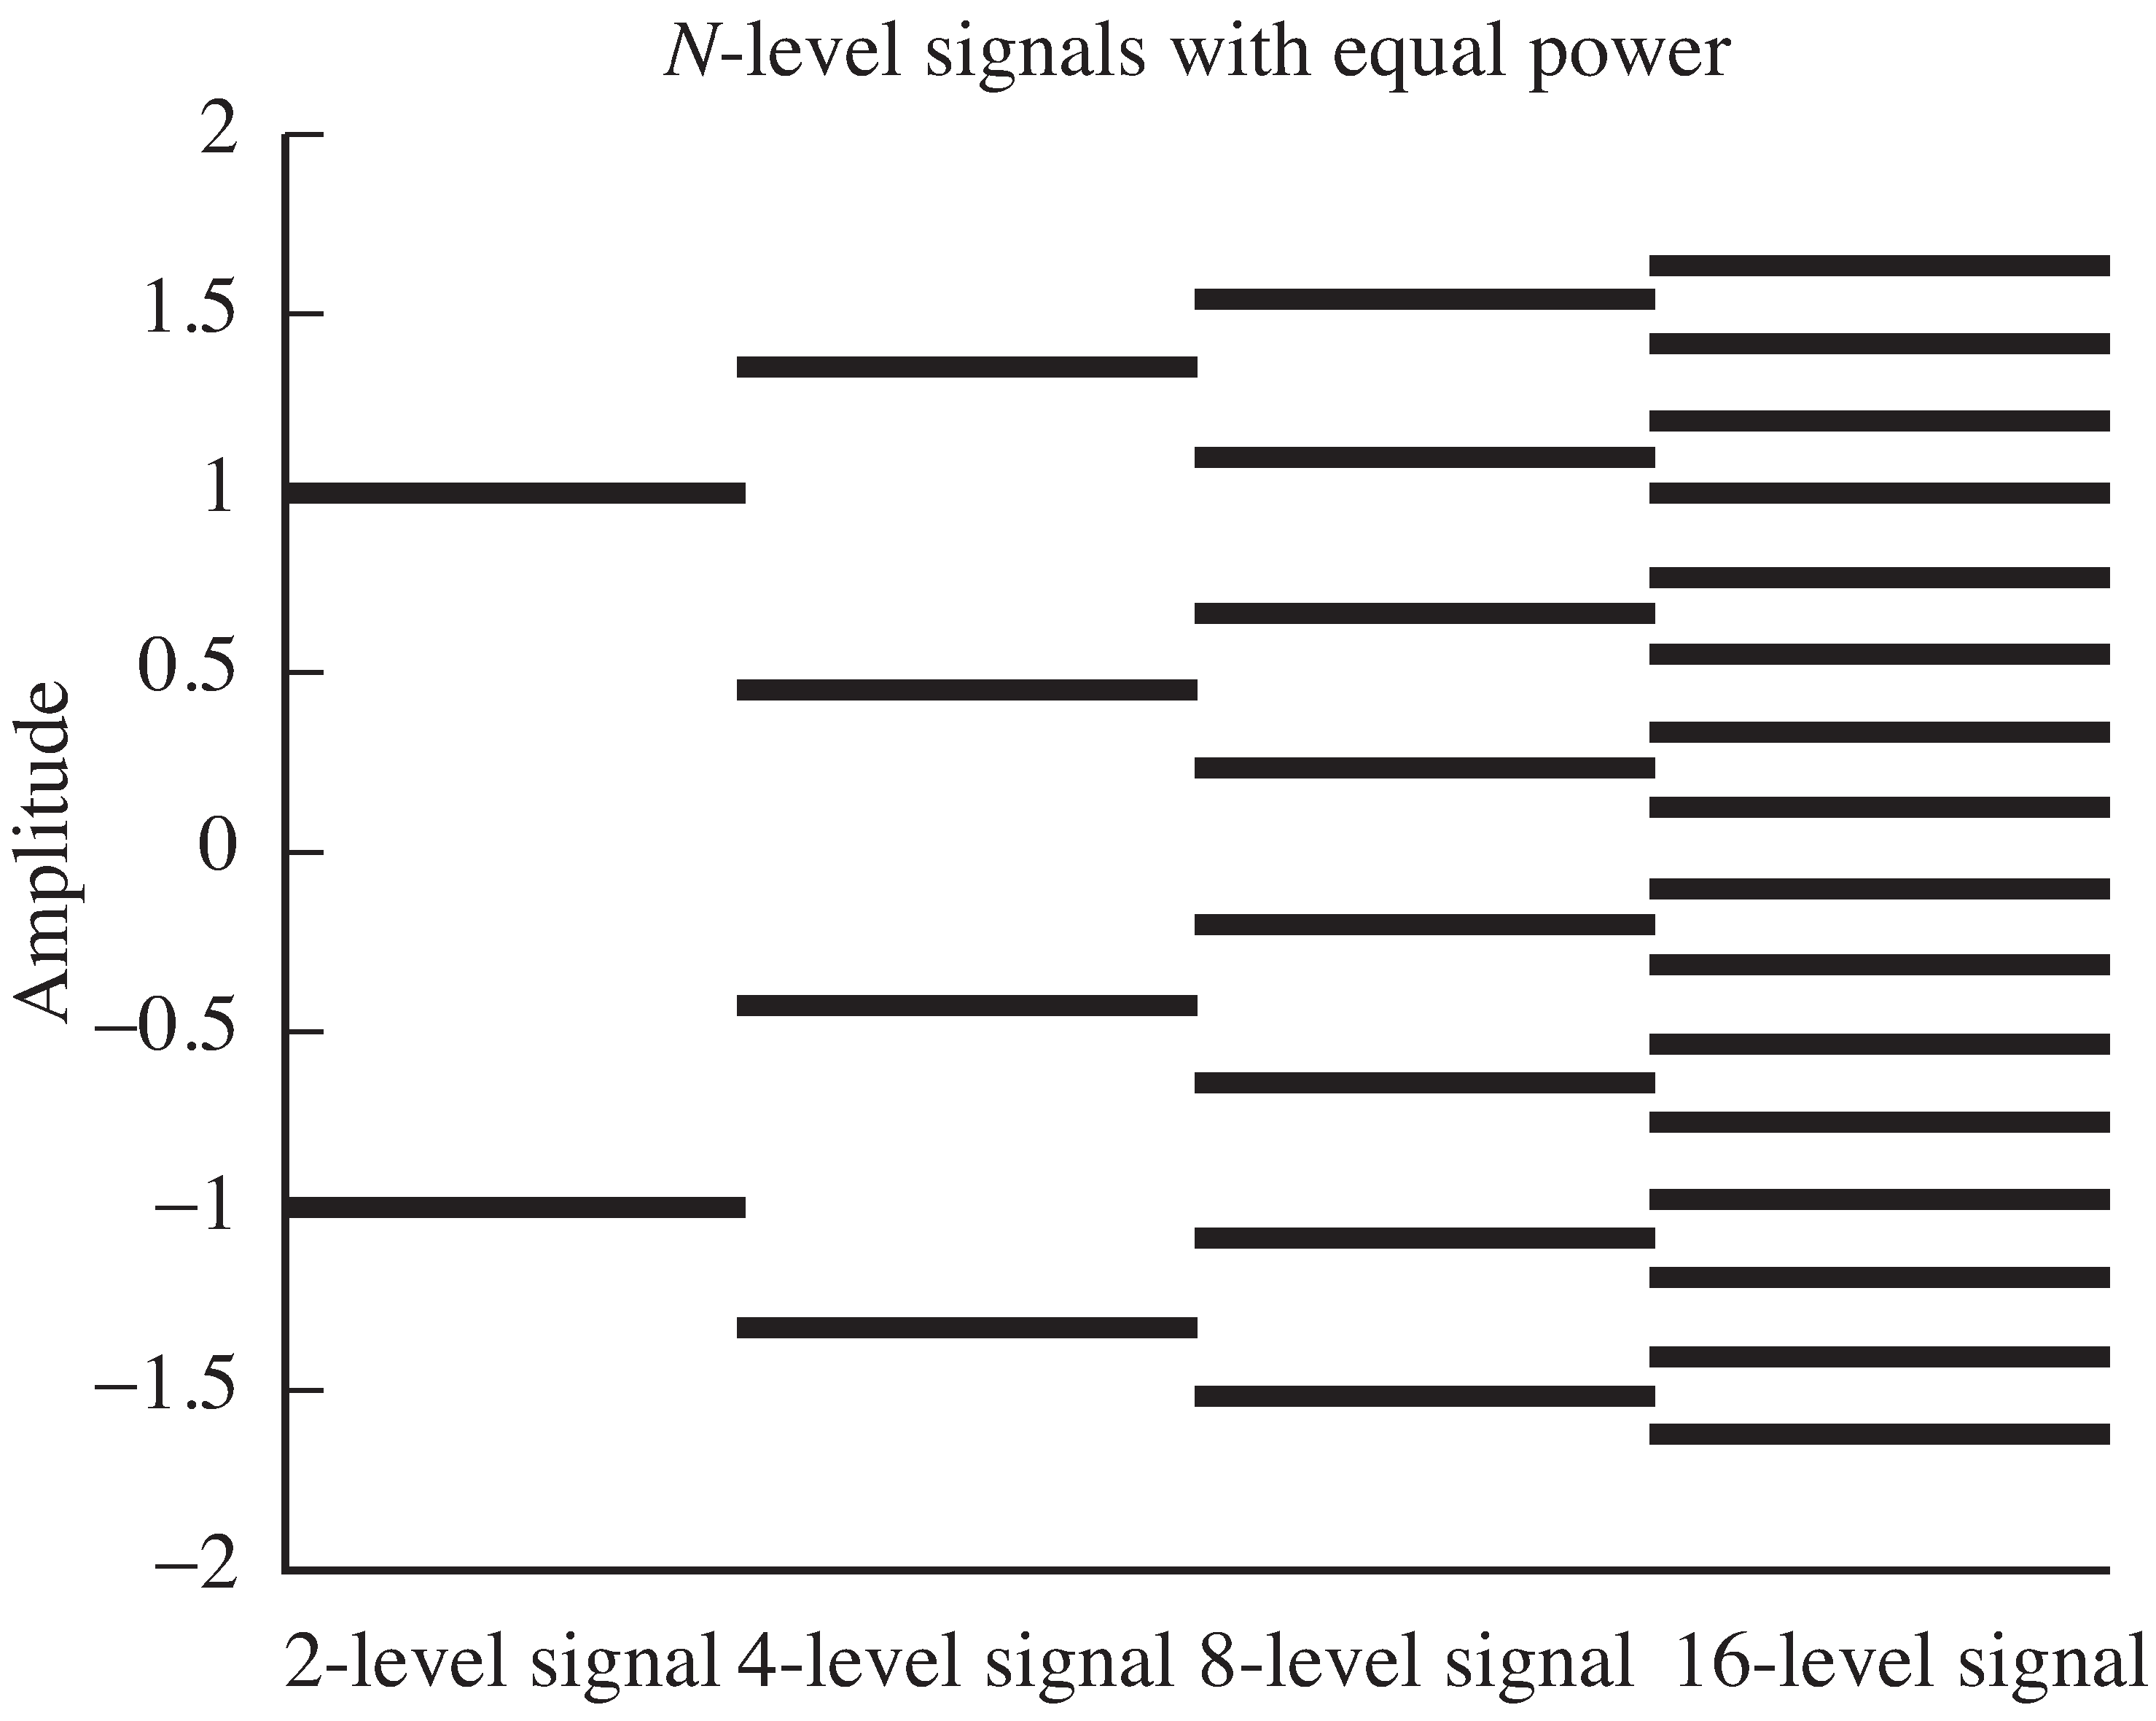 When the power is equal, the values of the N-level signal grow closer as N increases.